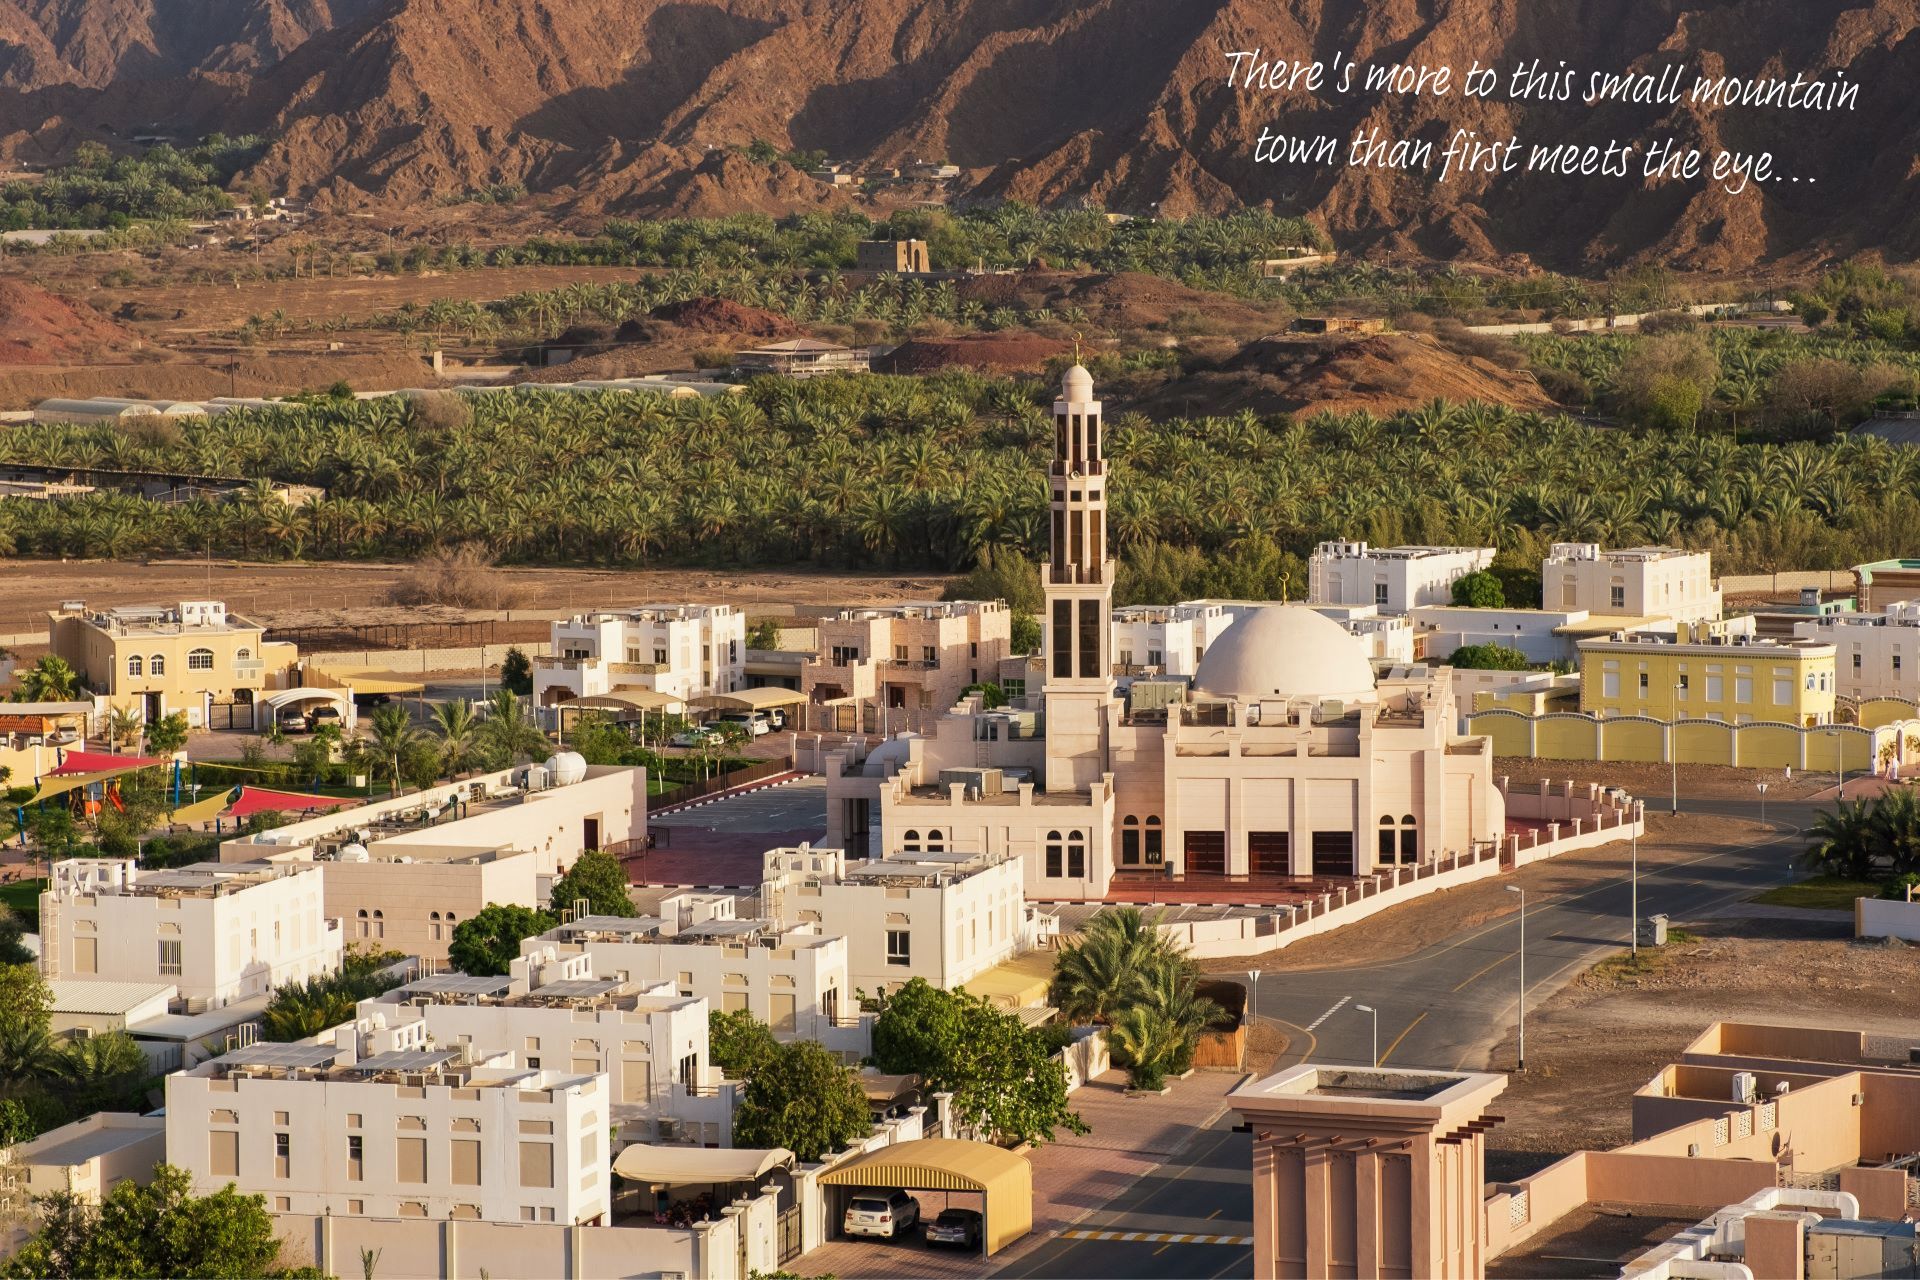 Hatta town centre, with mountains looming in the background.